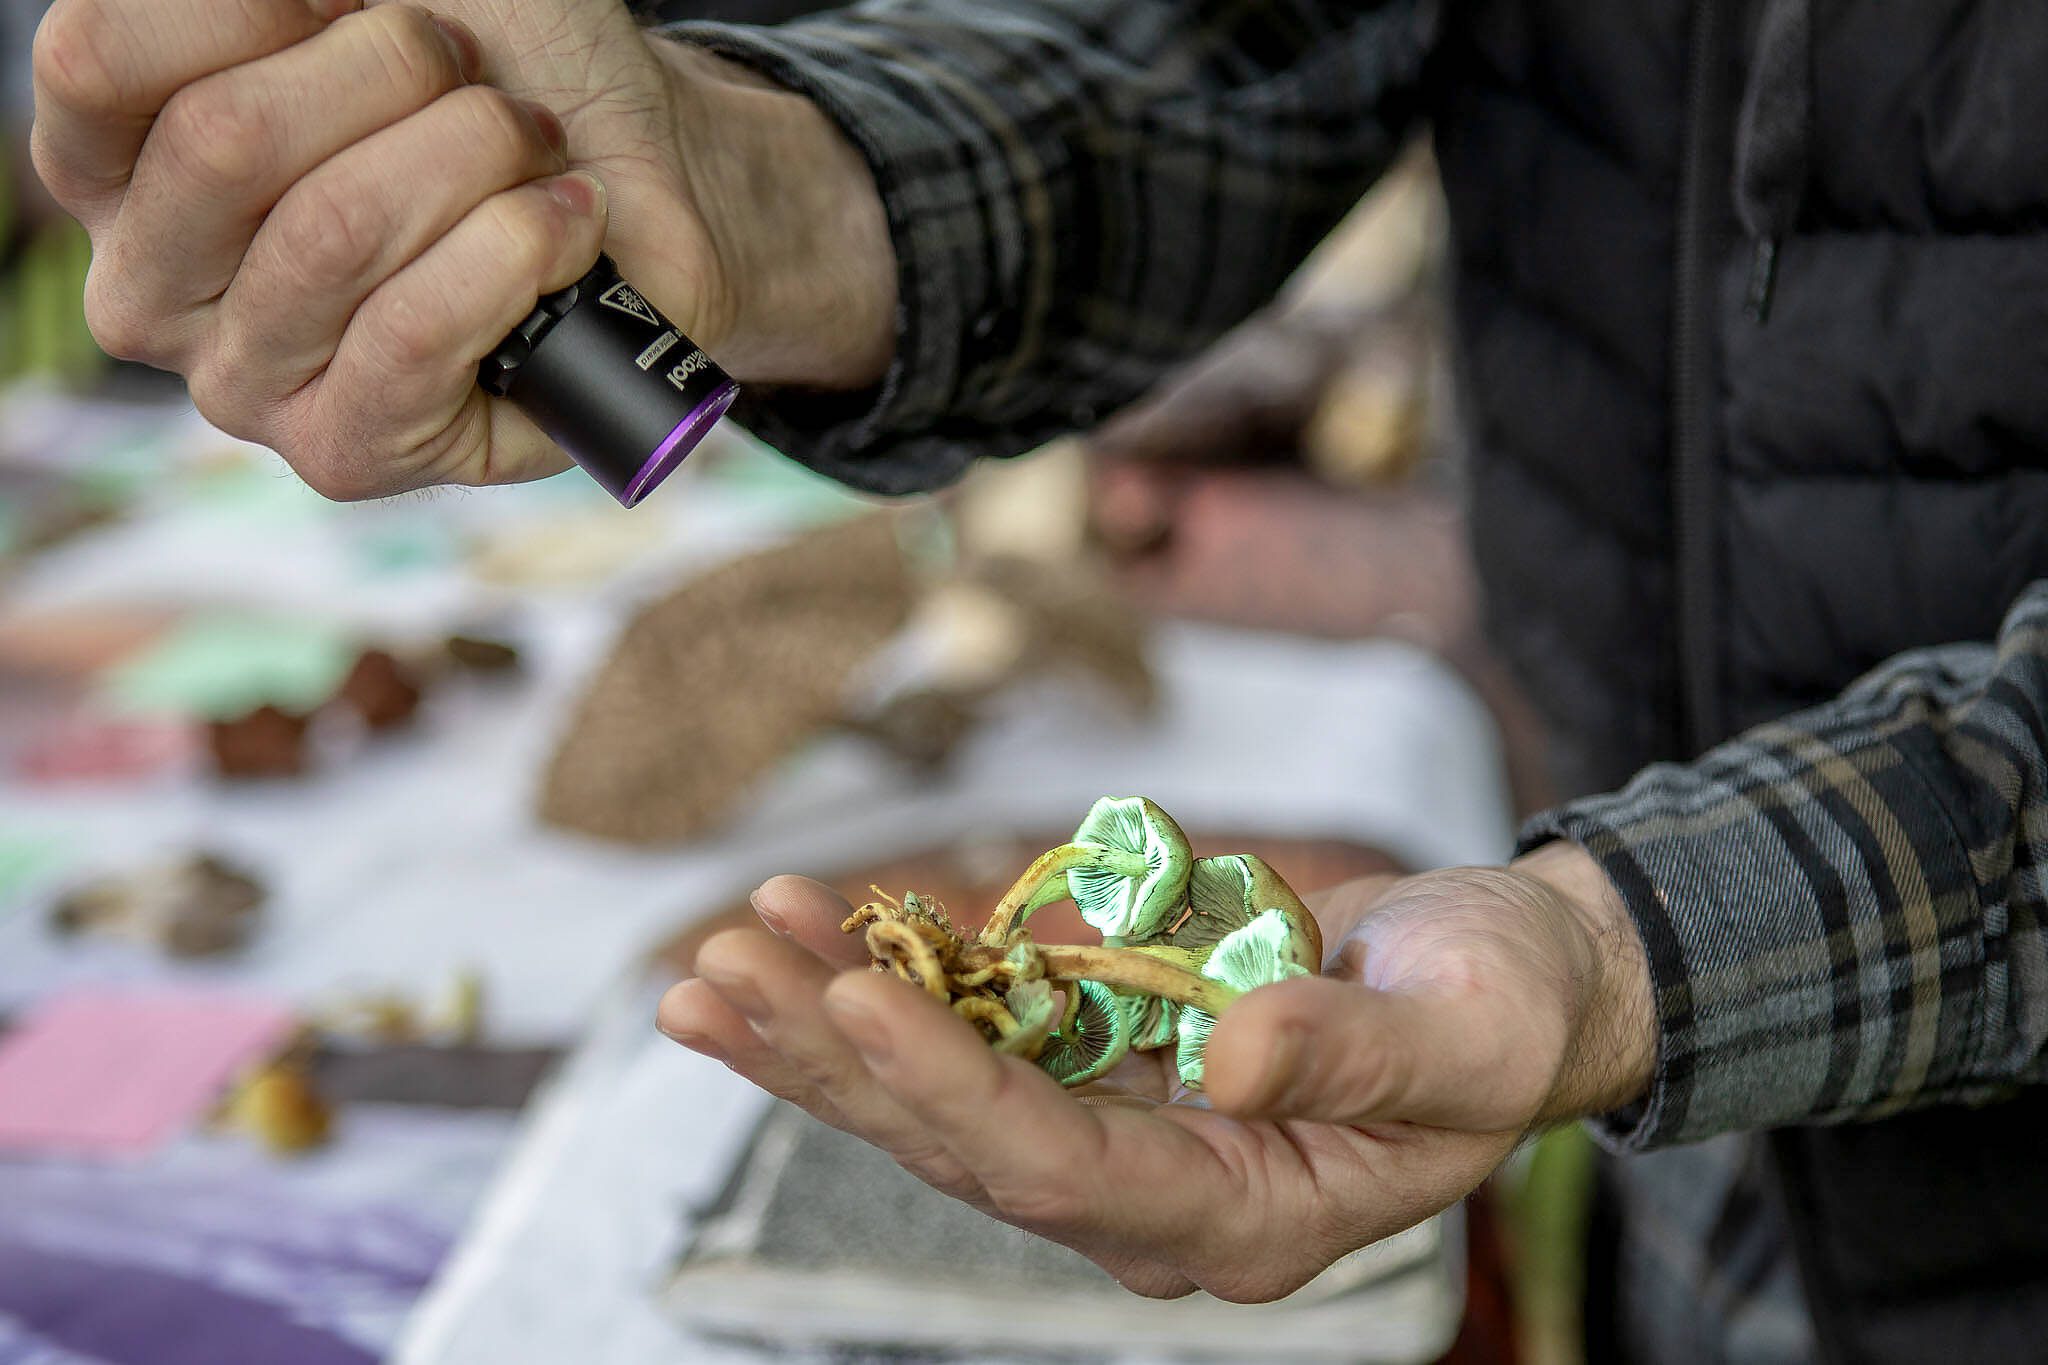 Travis Furlanic shows the fluorescent properties of sulfur tuft mushrooms during a Whidbey Wild Mushroom Tour at Tilth Farmers Market on Saturday, April 27, 2024 in Langley, Washington. (Annie Barker / The Herald)